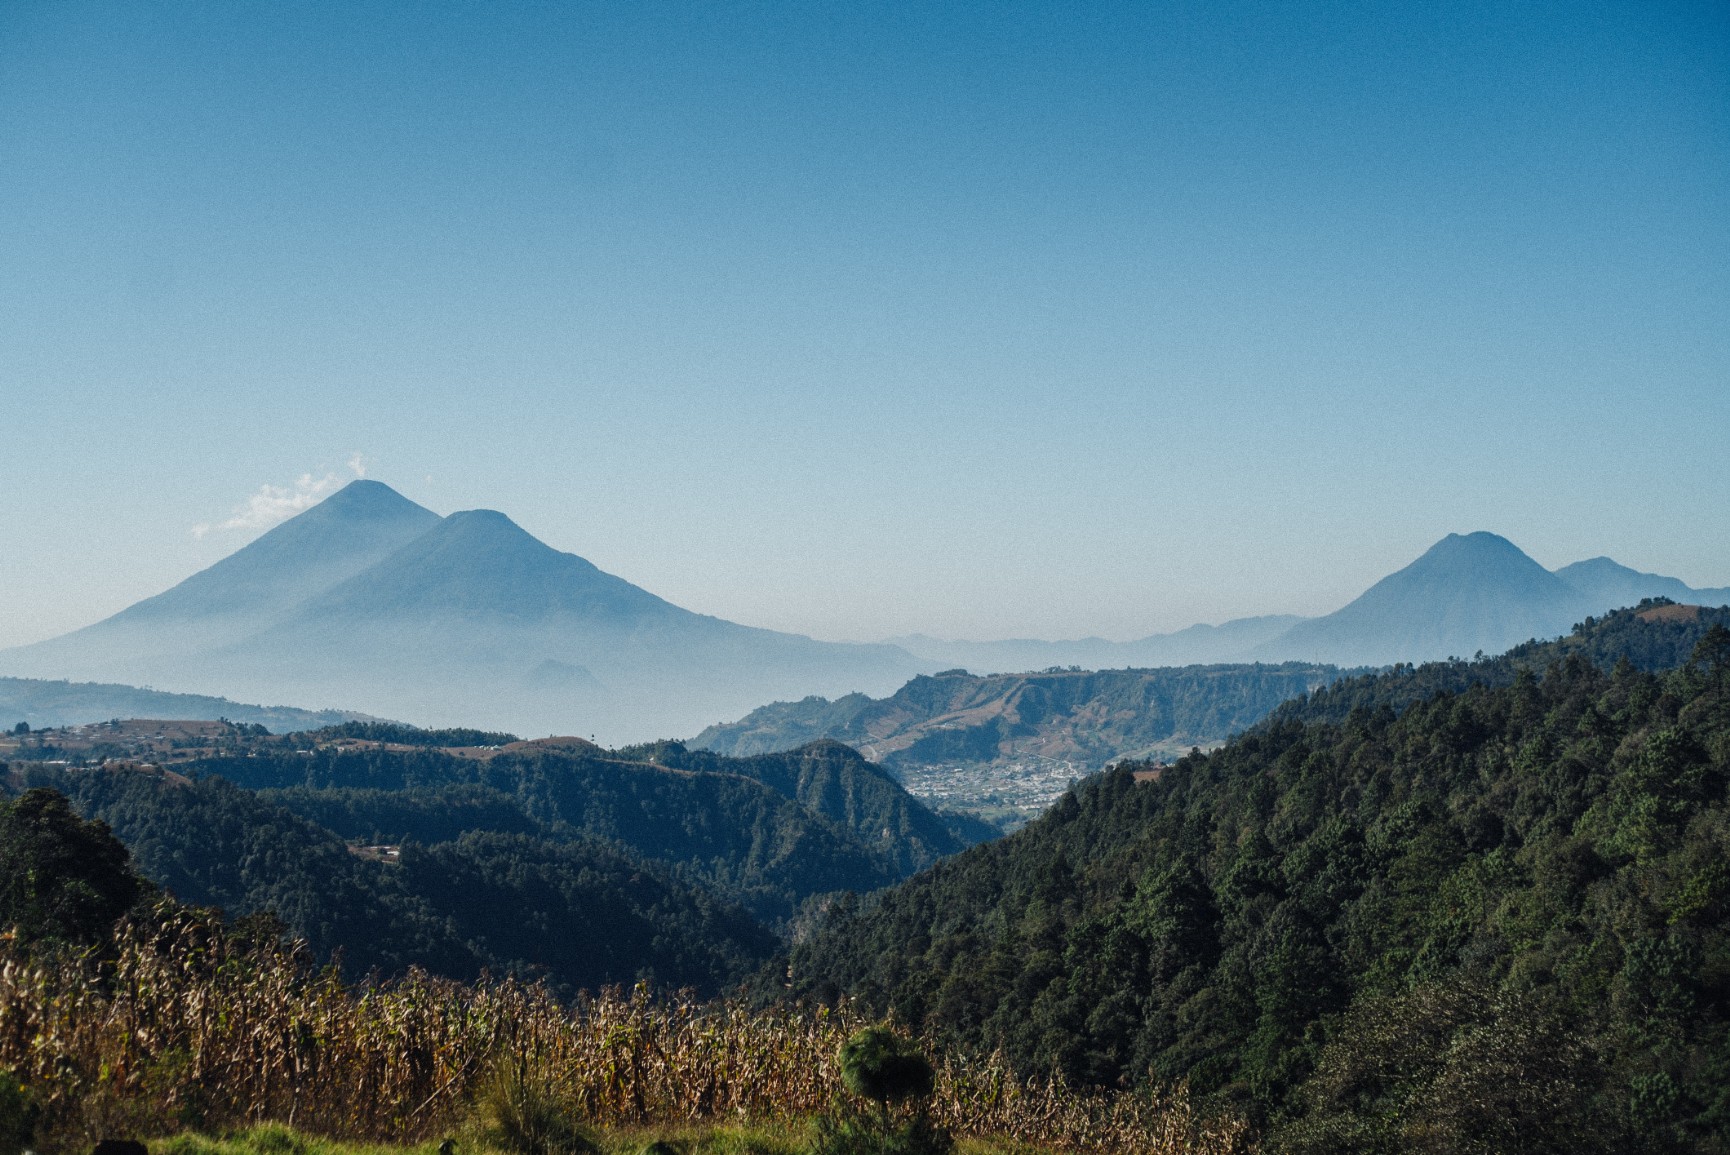 From restoring degraded lands to enhancing farmers’ nutrition and income in Guatemala